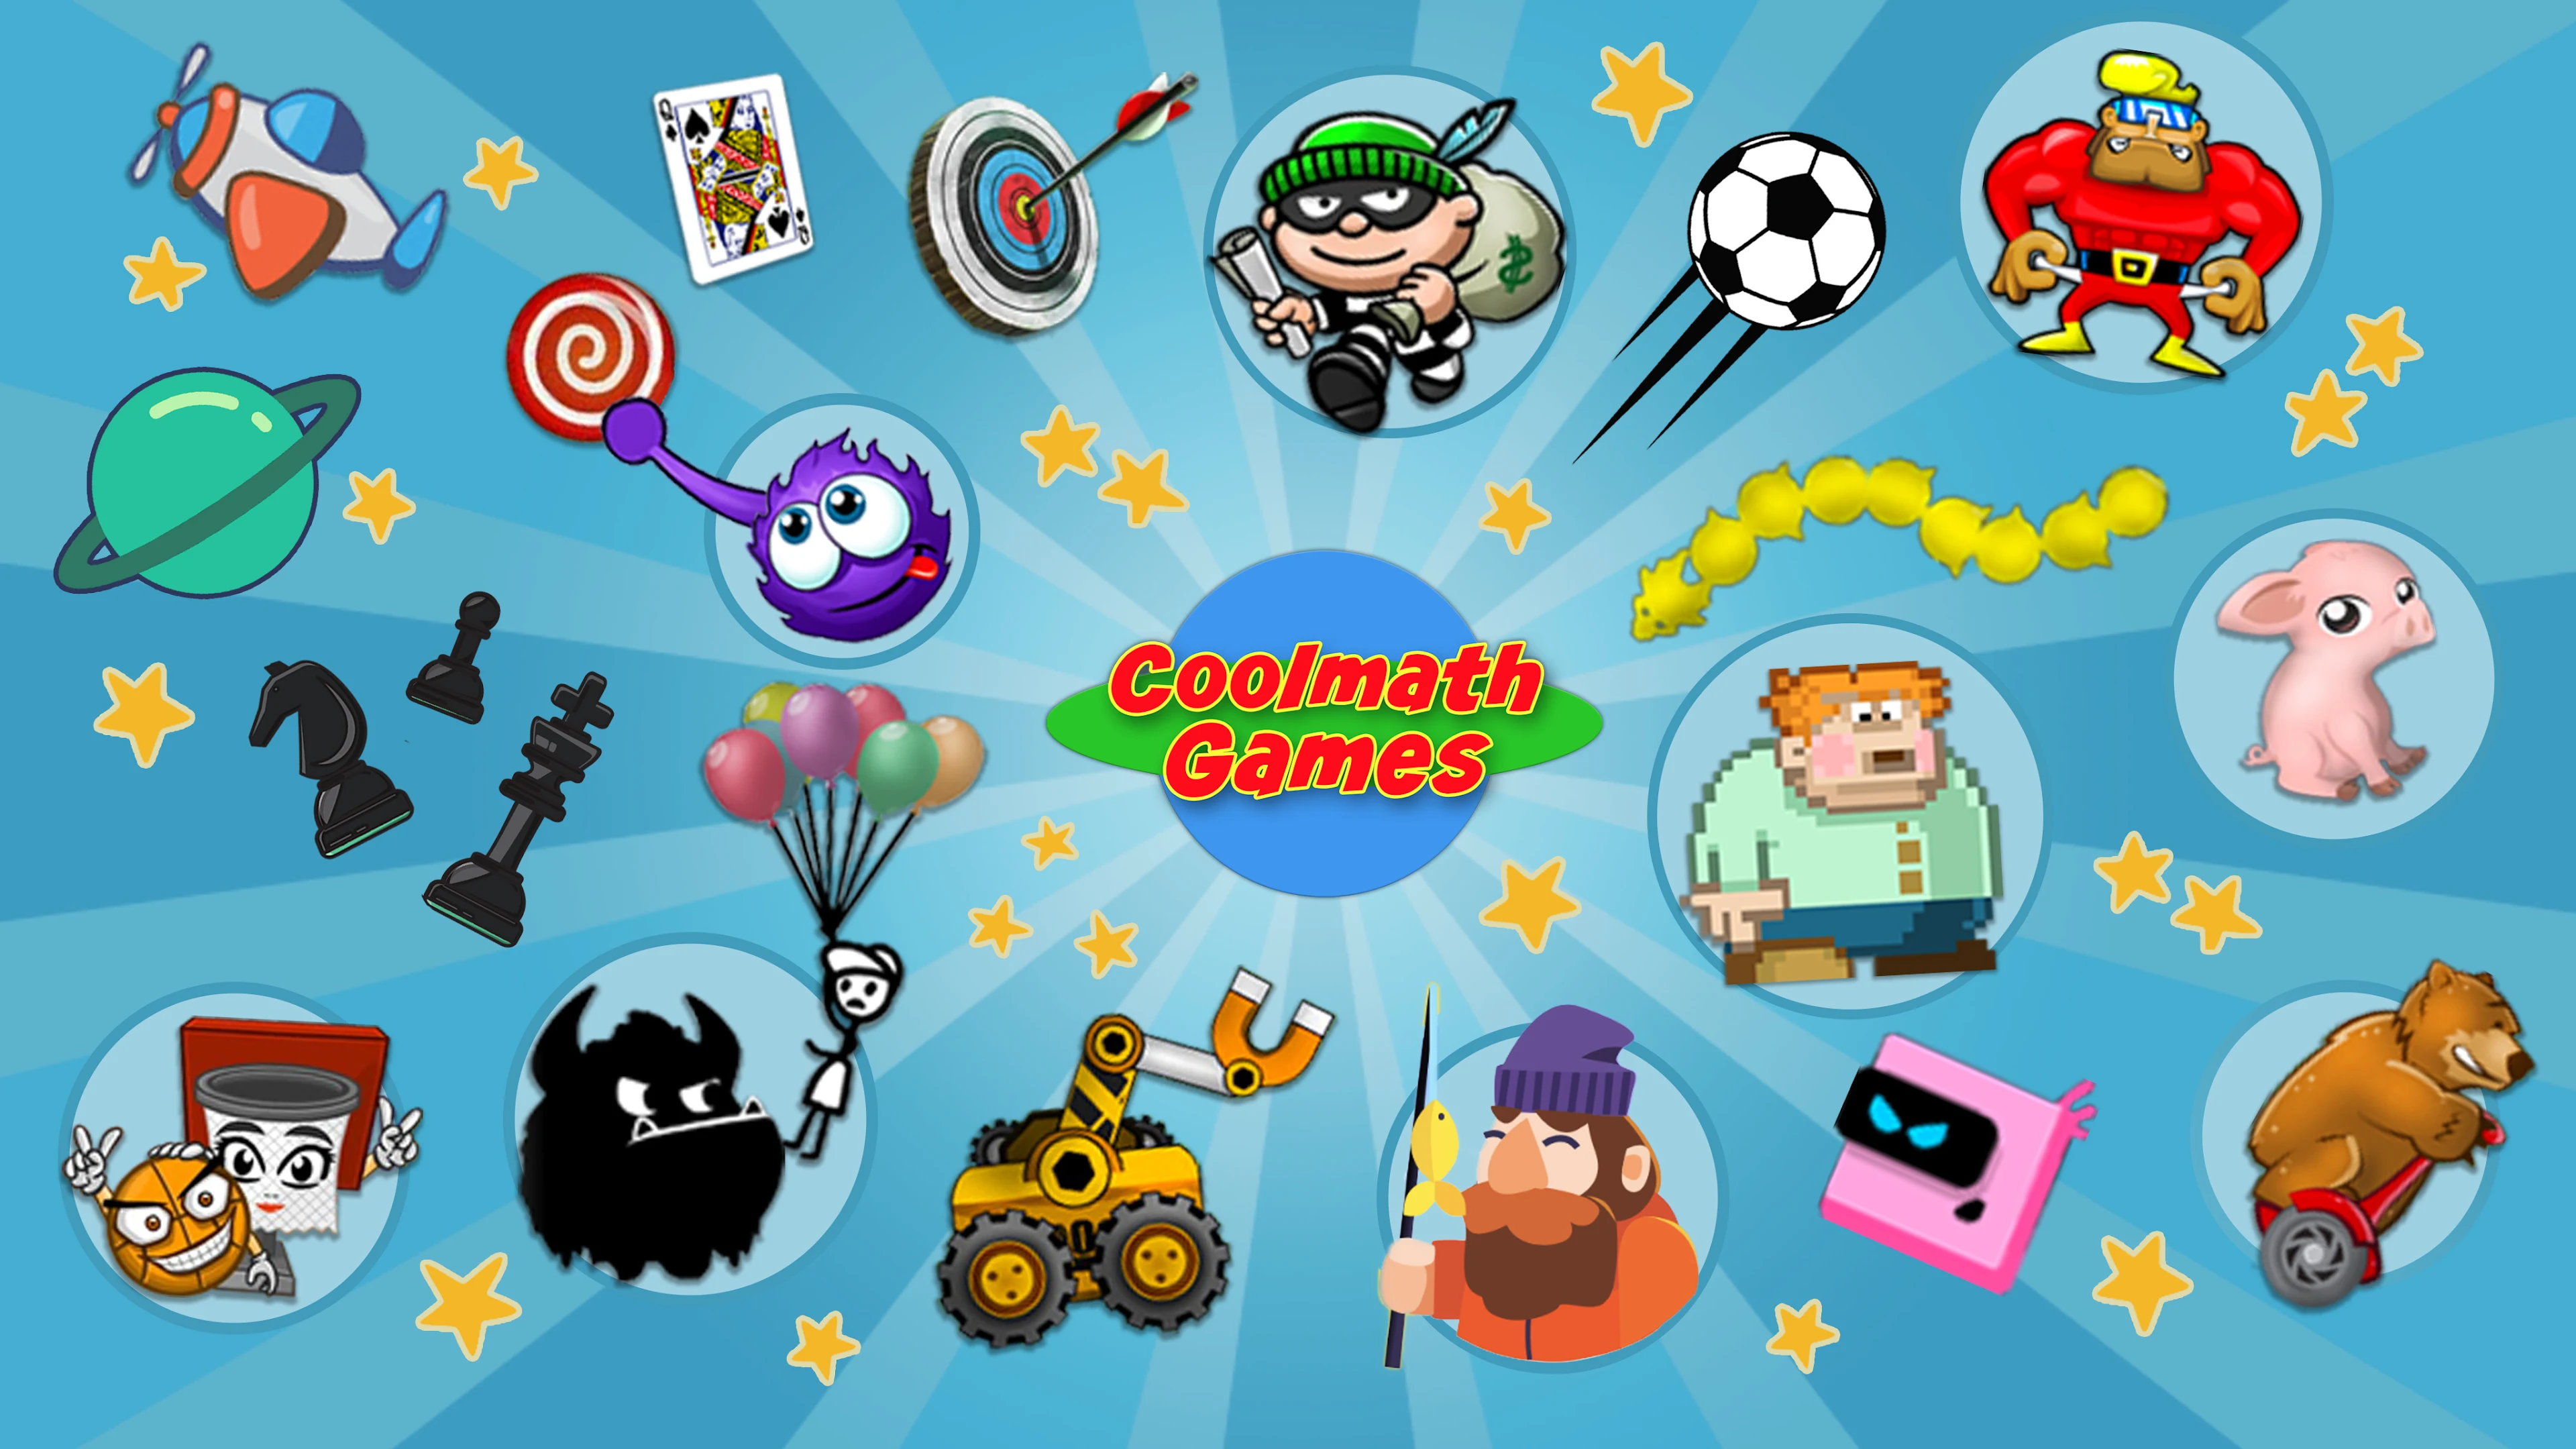 Android Apps by CoolmathGames.com on Google Play